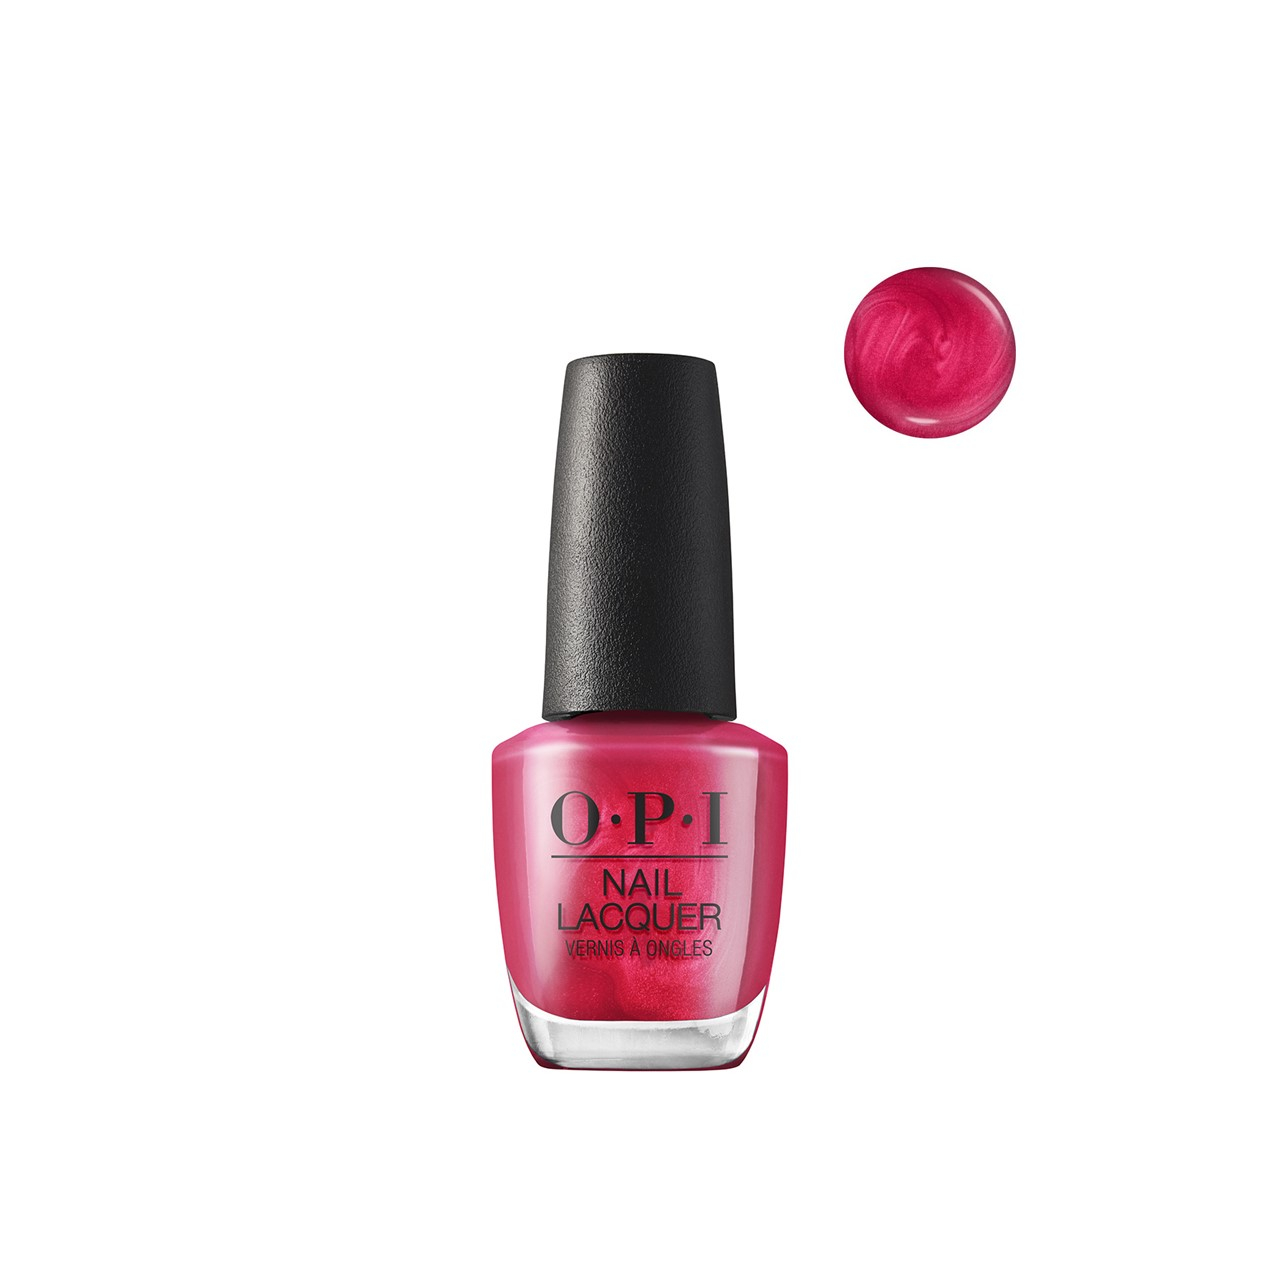 OPI Nail Lacquer 15 Minutes of Flame 15ml (0.51fl oz)